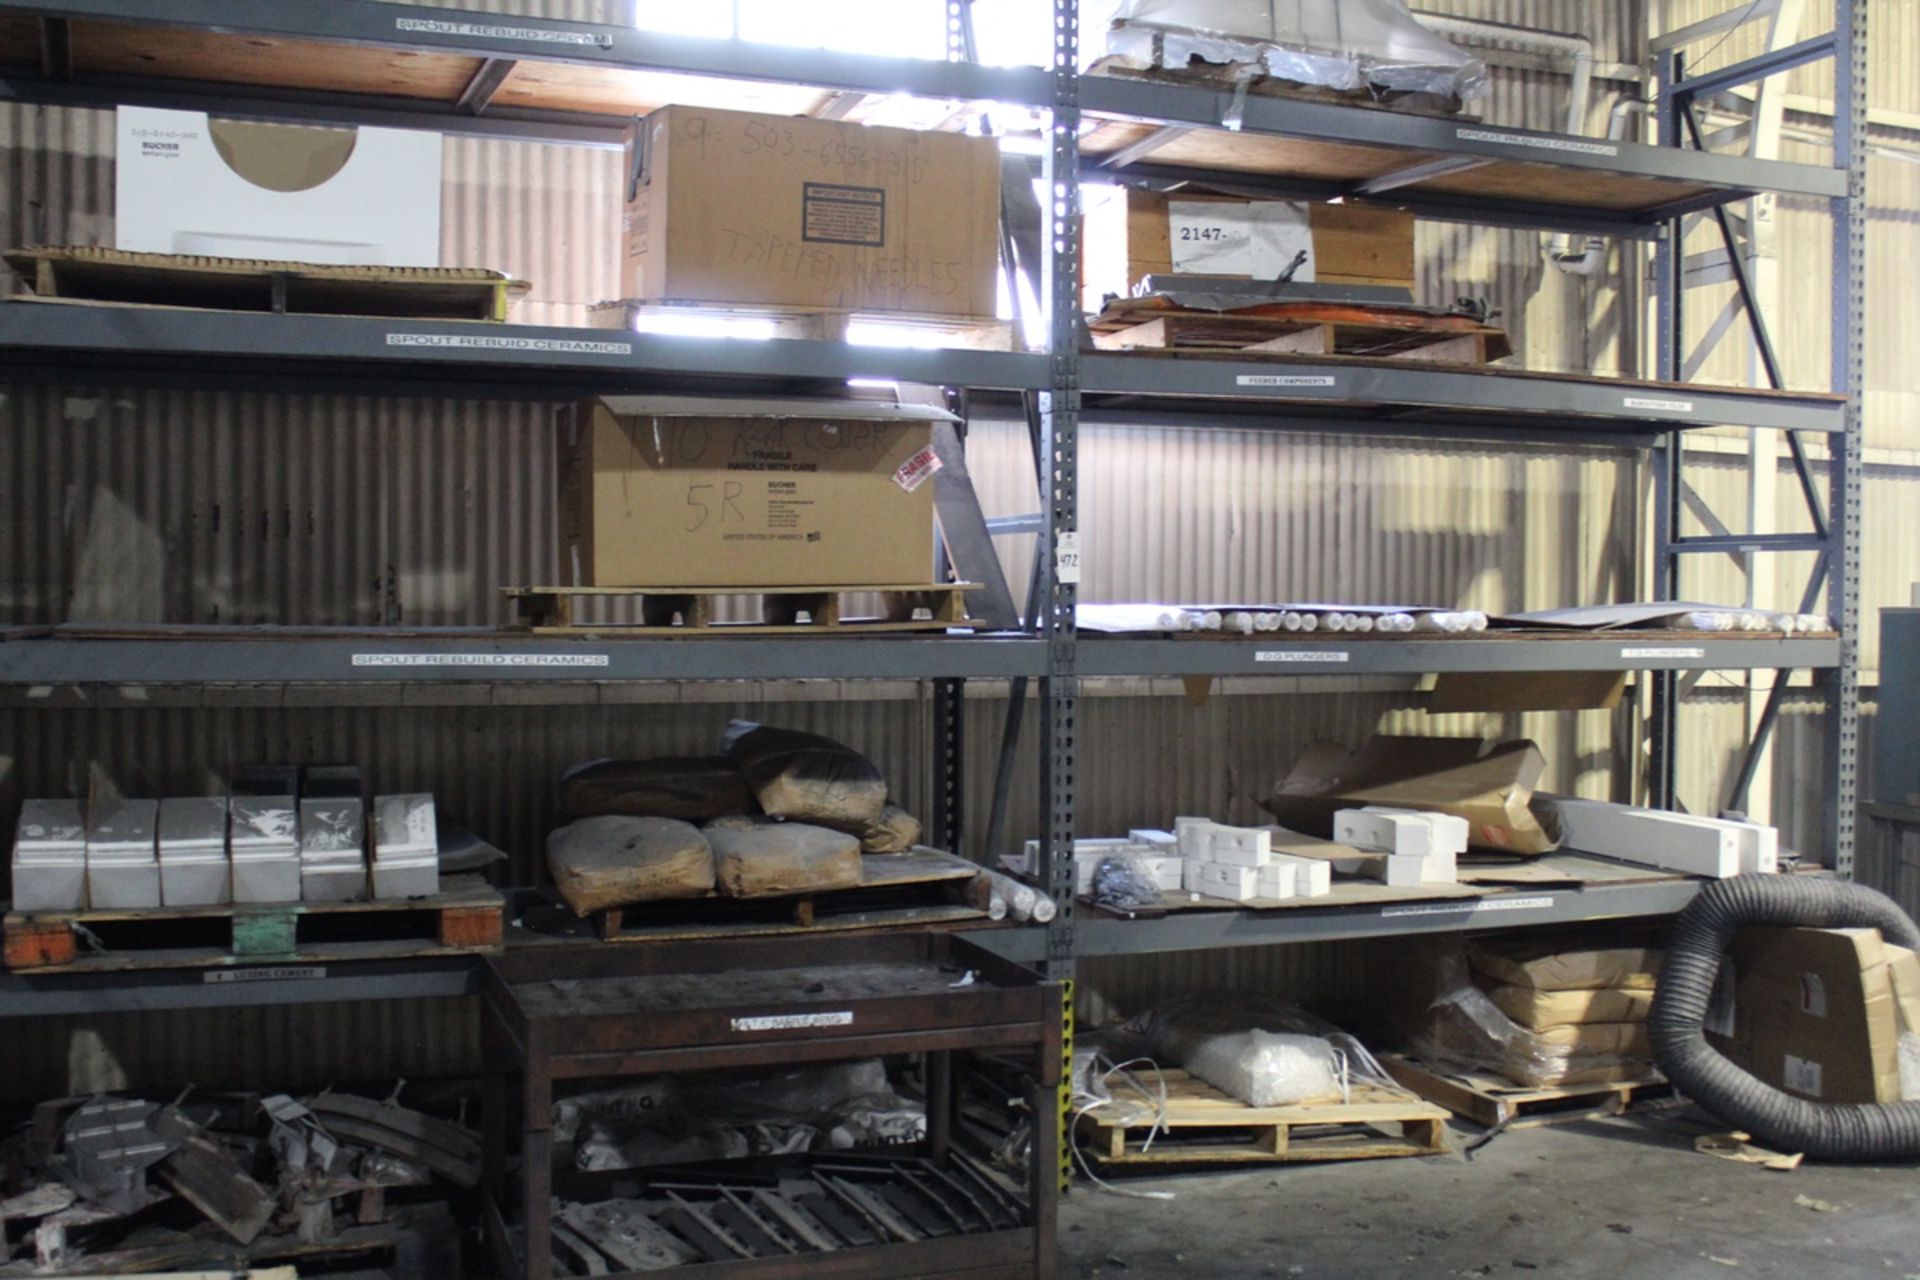 Pallet Rack, W/ Contents, Spare Parts | Rig Fee: Hand Carry or Contact Rigger